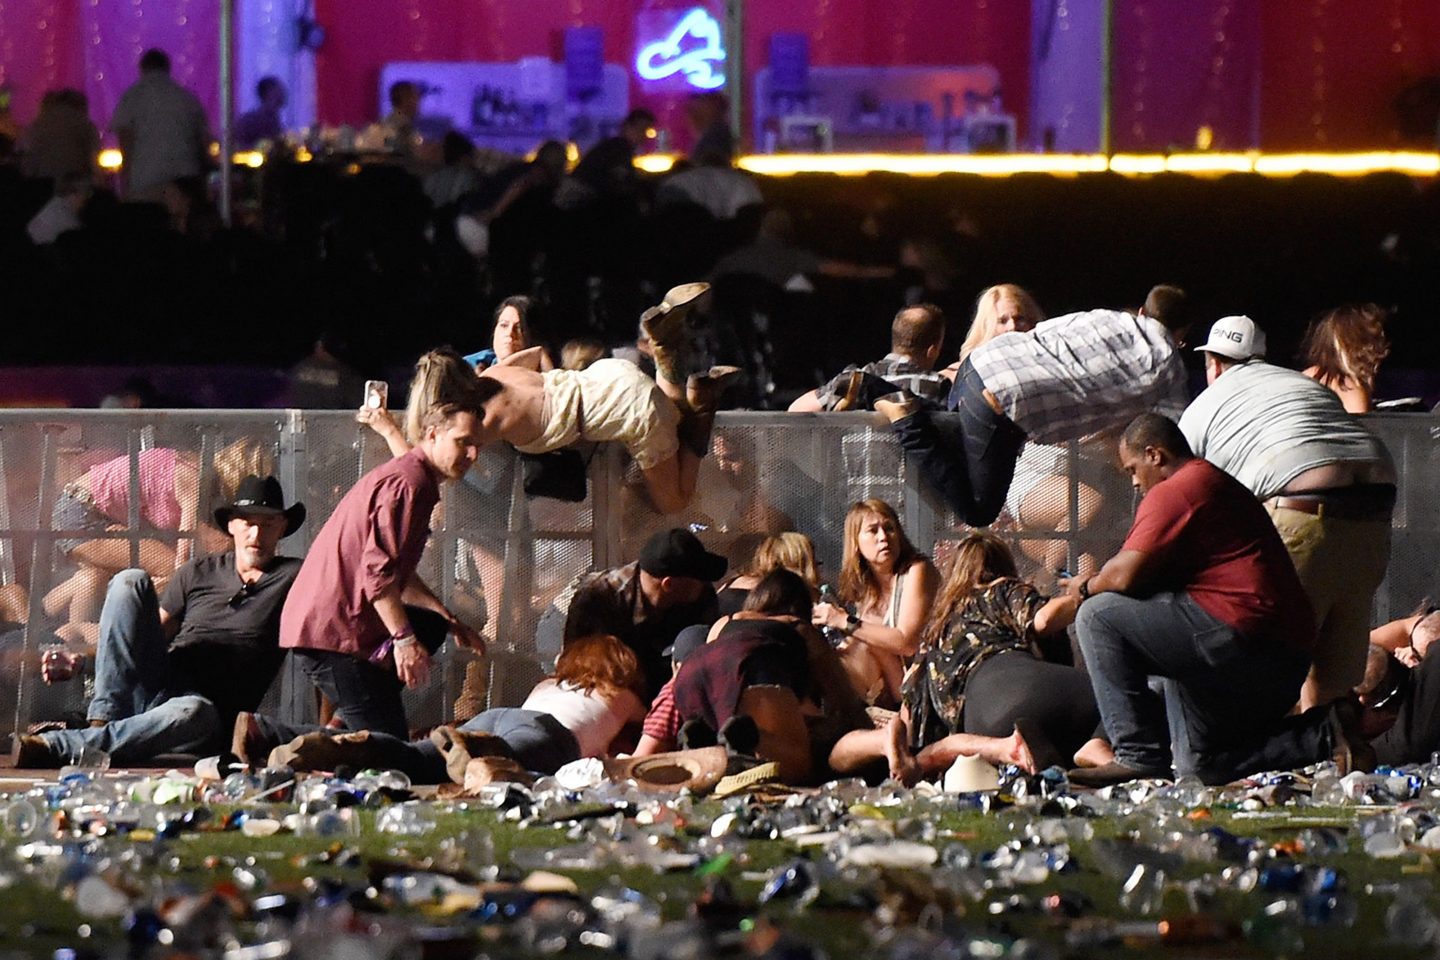 People dive for safety after gunman Stephen Paddock opens fire at a Las Vegas country music festival in October 2017.